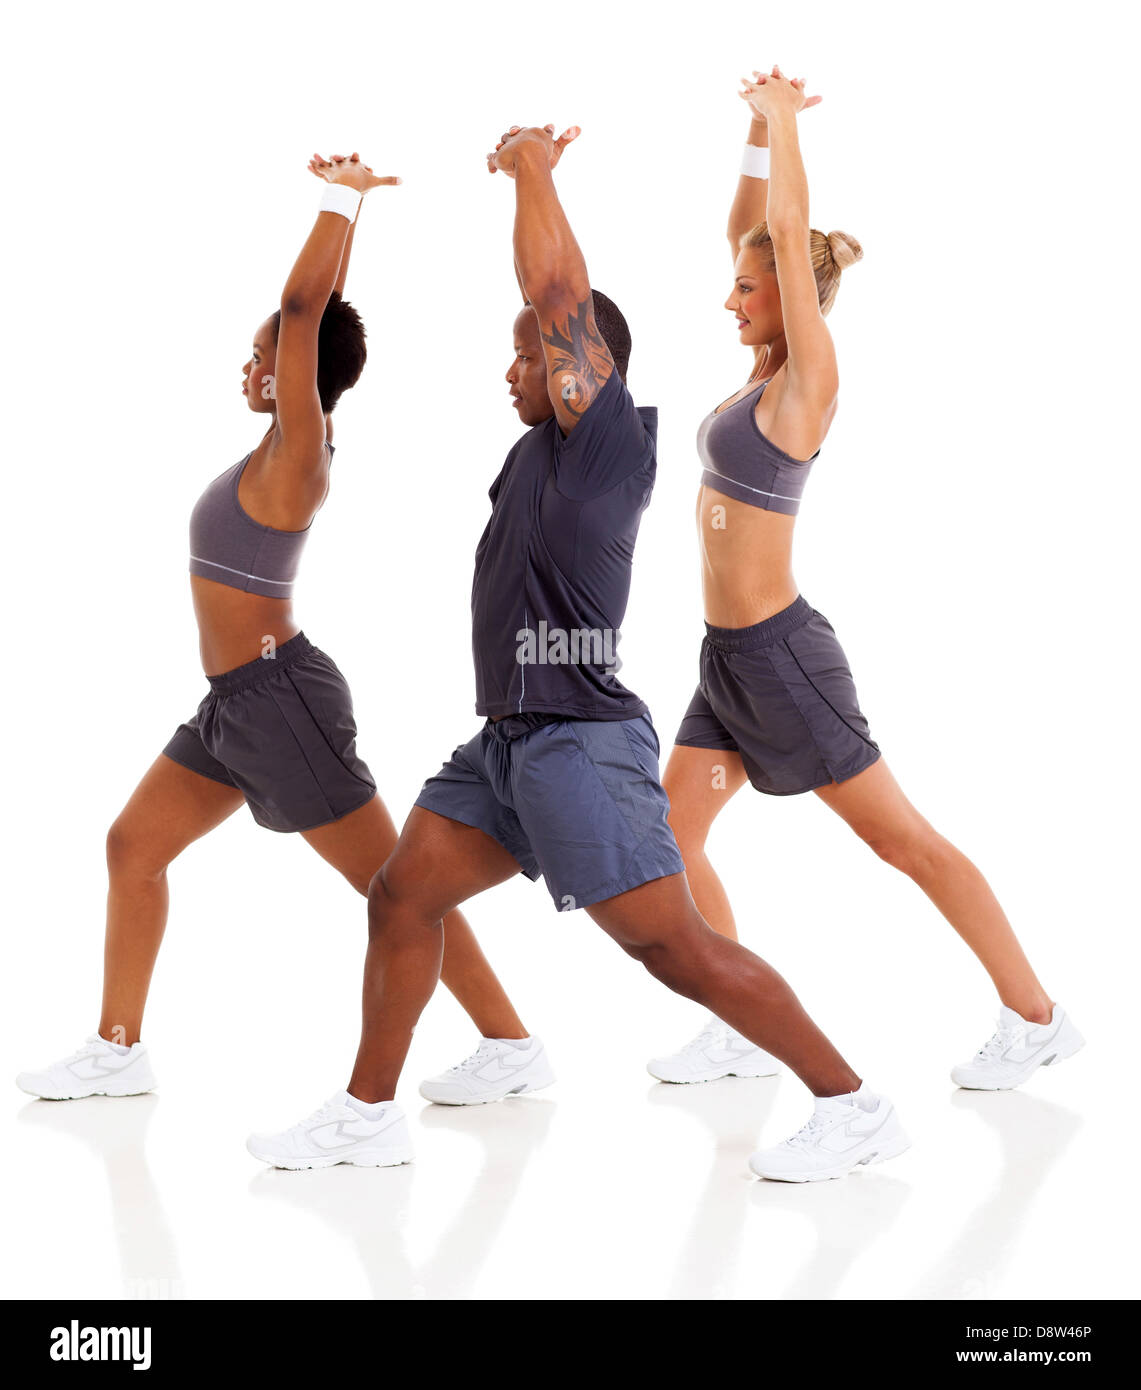 three people stretching before exercising, isolated on white Stock Photo